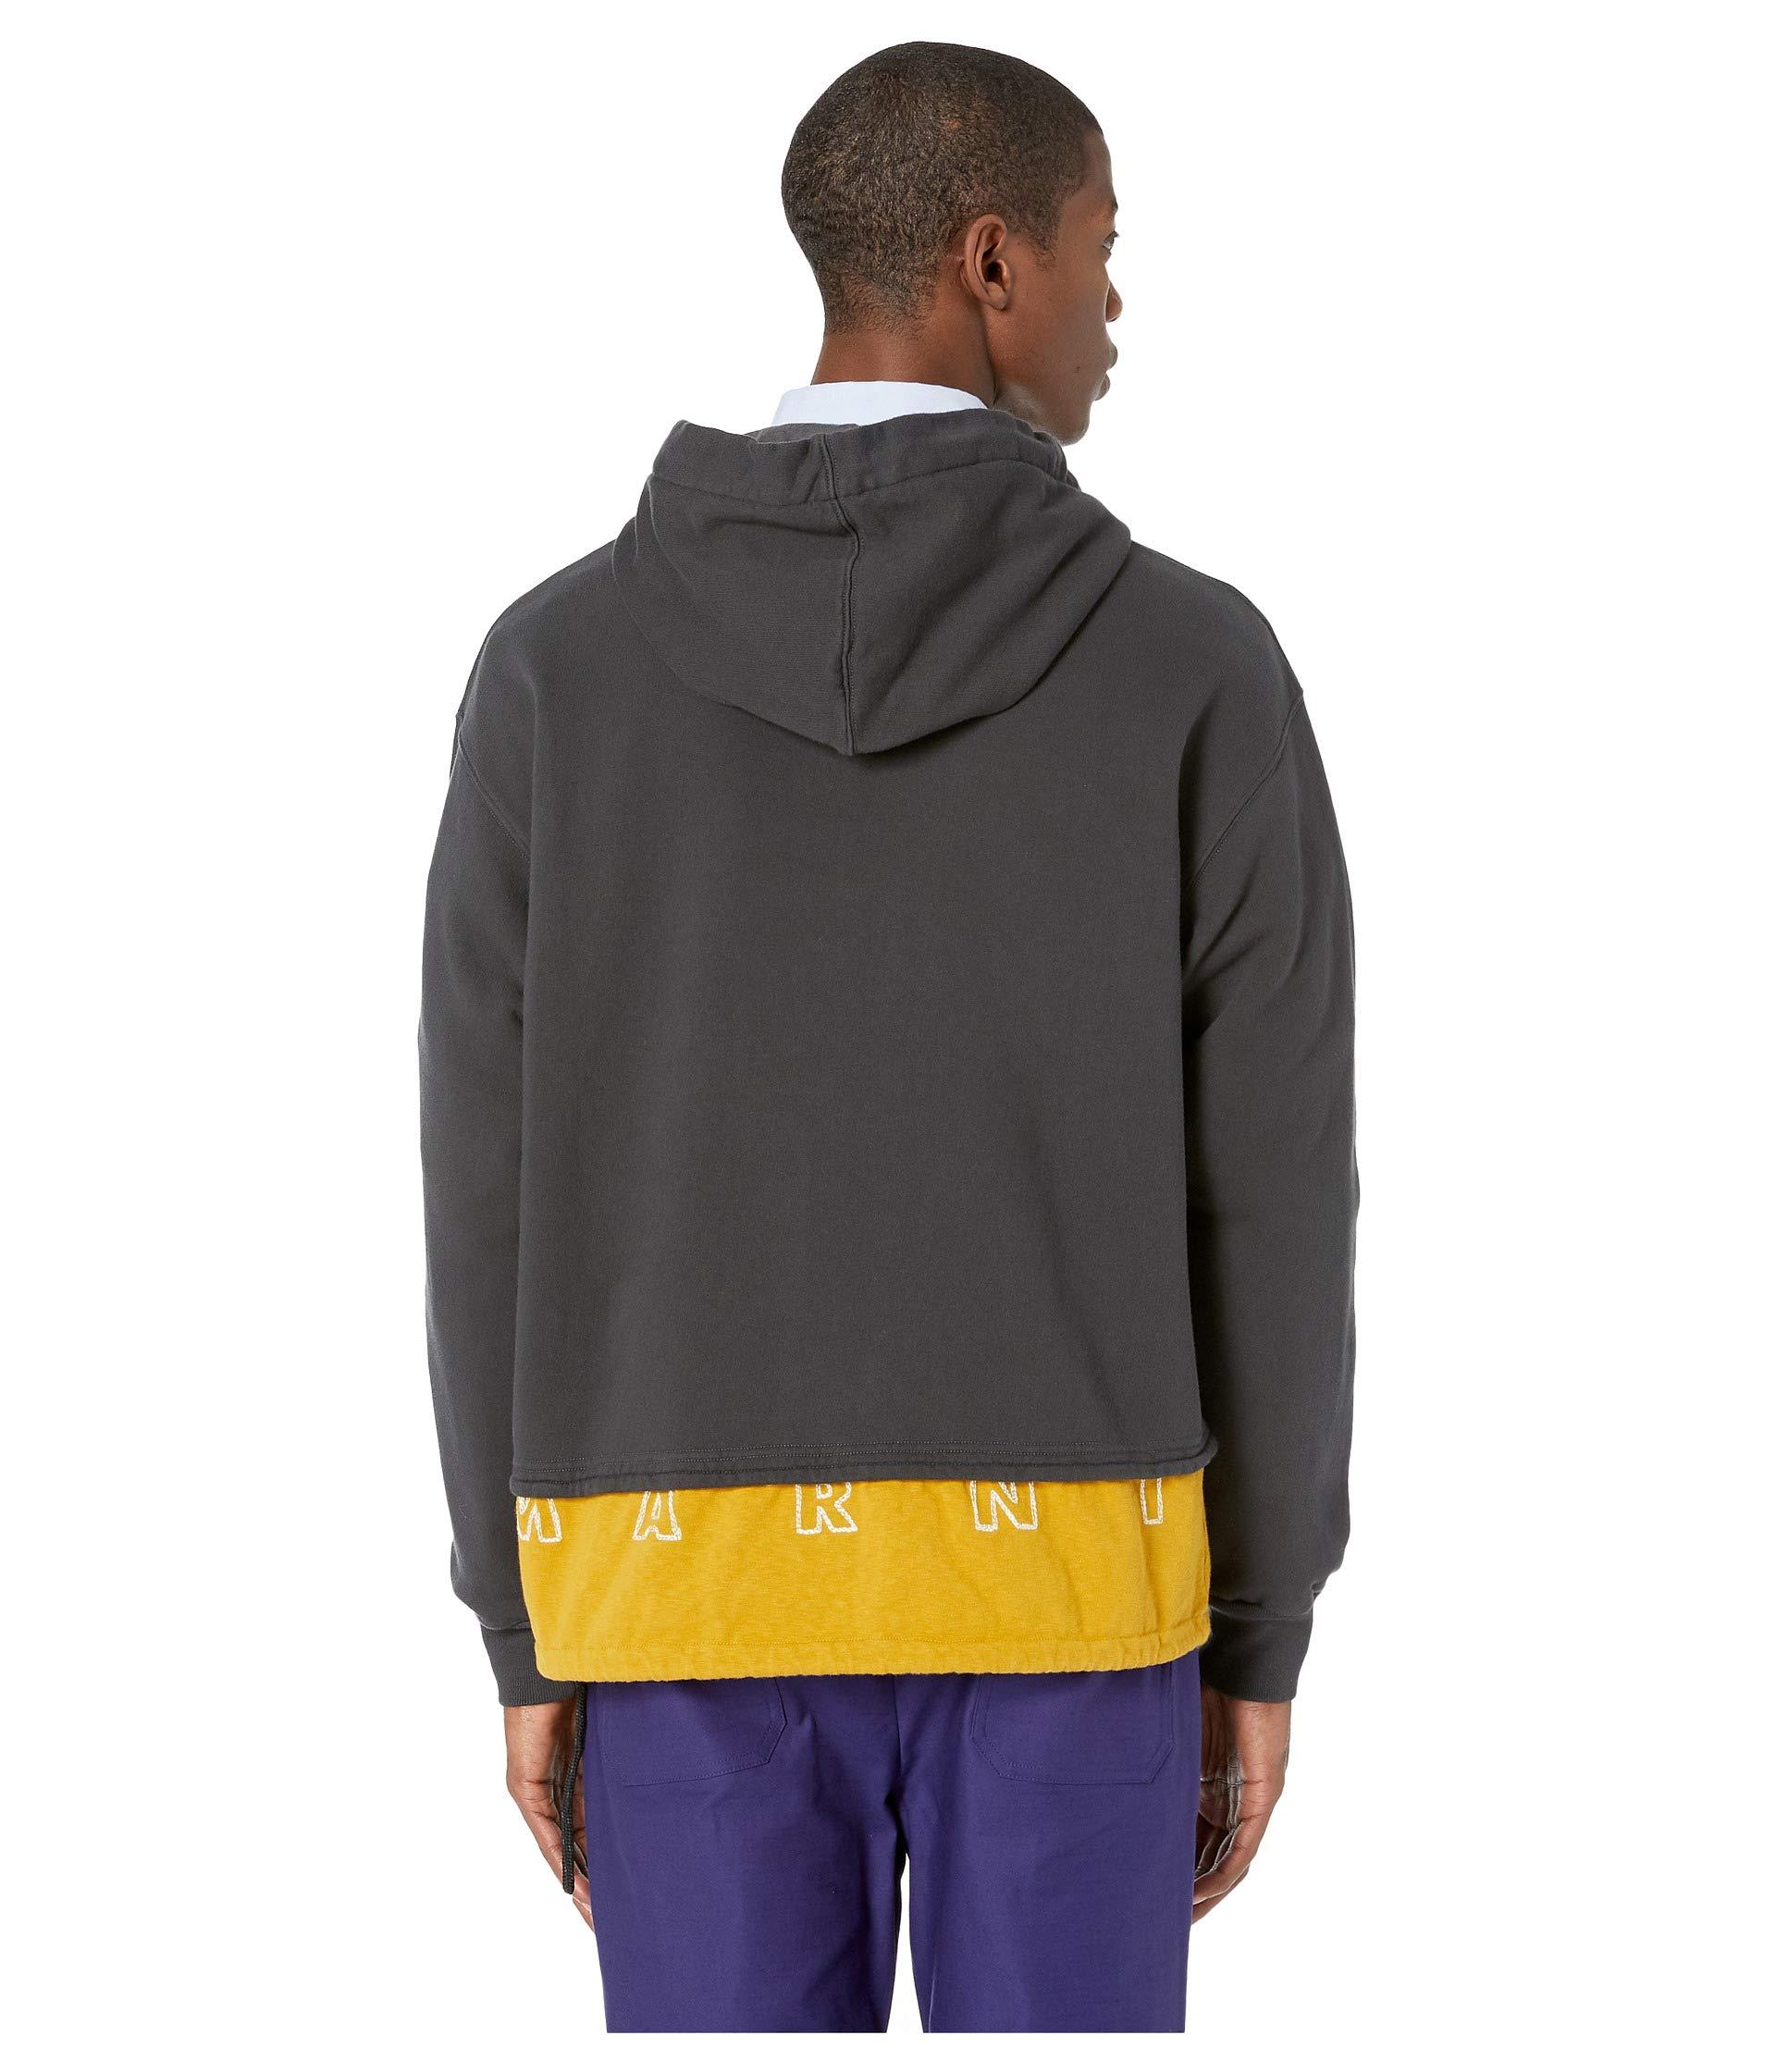 Marni Cotton Contrast Hoodie in Grey/Mustard (Gray) for Men - Lyst